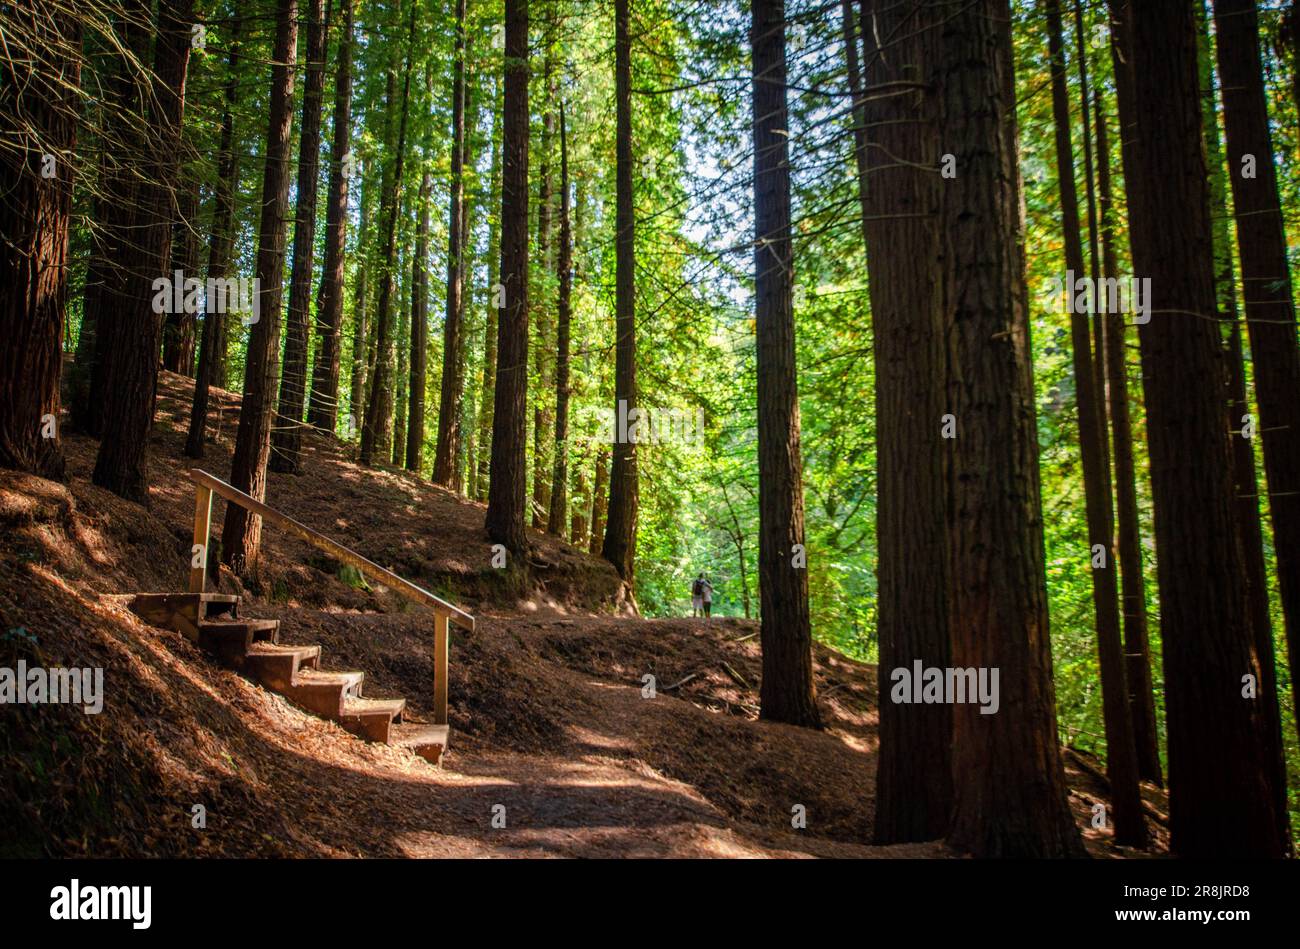 Picture of Couple Hugging from a Distance During Nature Excursion to Disconnect from the Routine and Breathe Clean Air in the Sequoia Forest. Sunlit Stock Photo